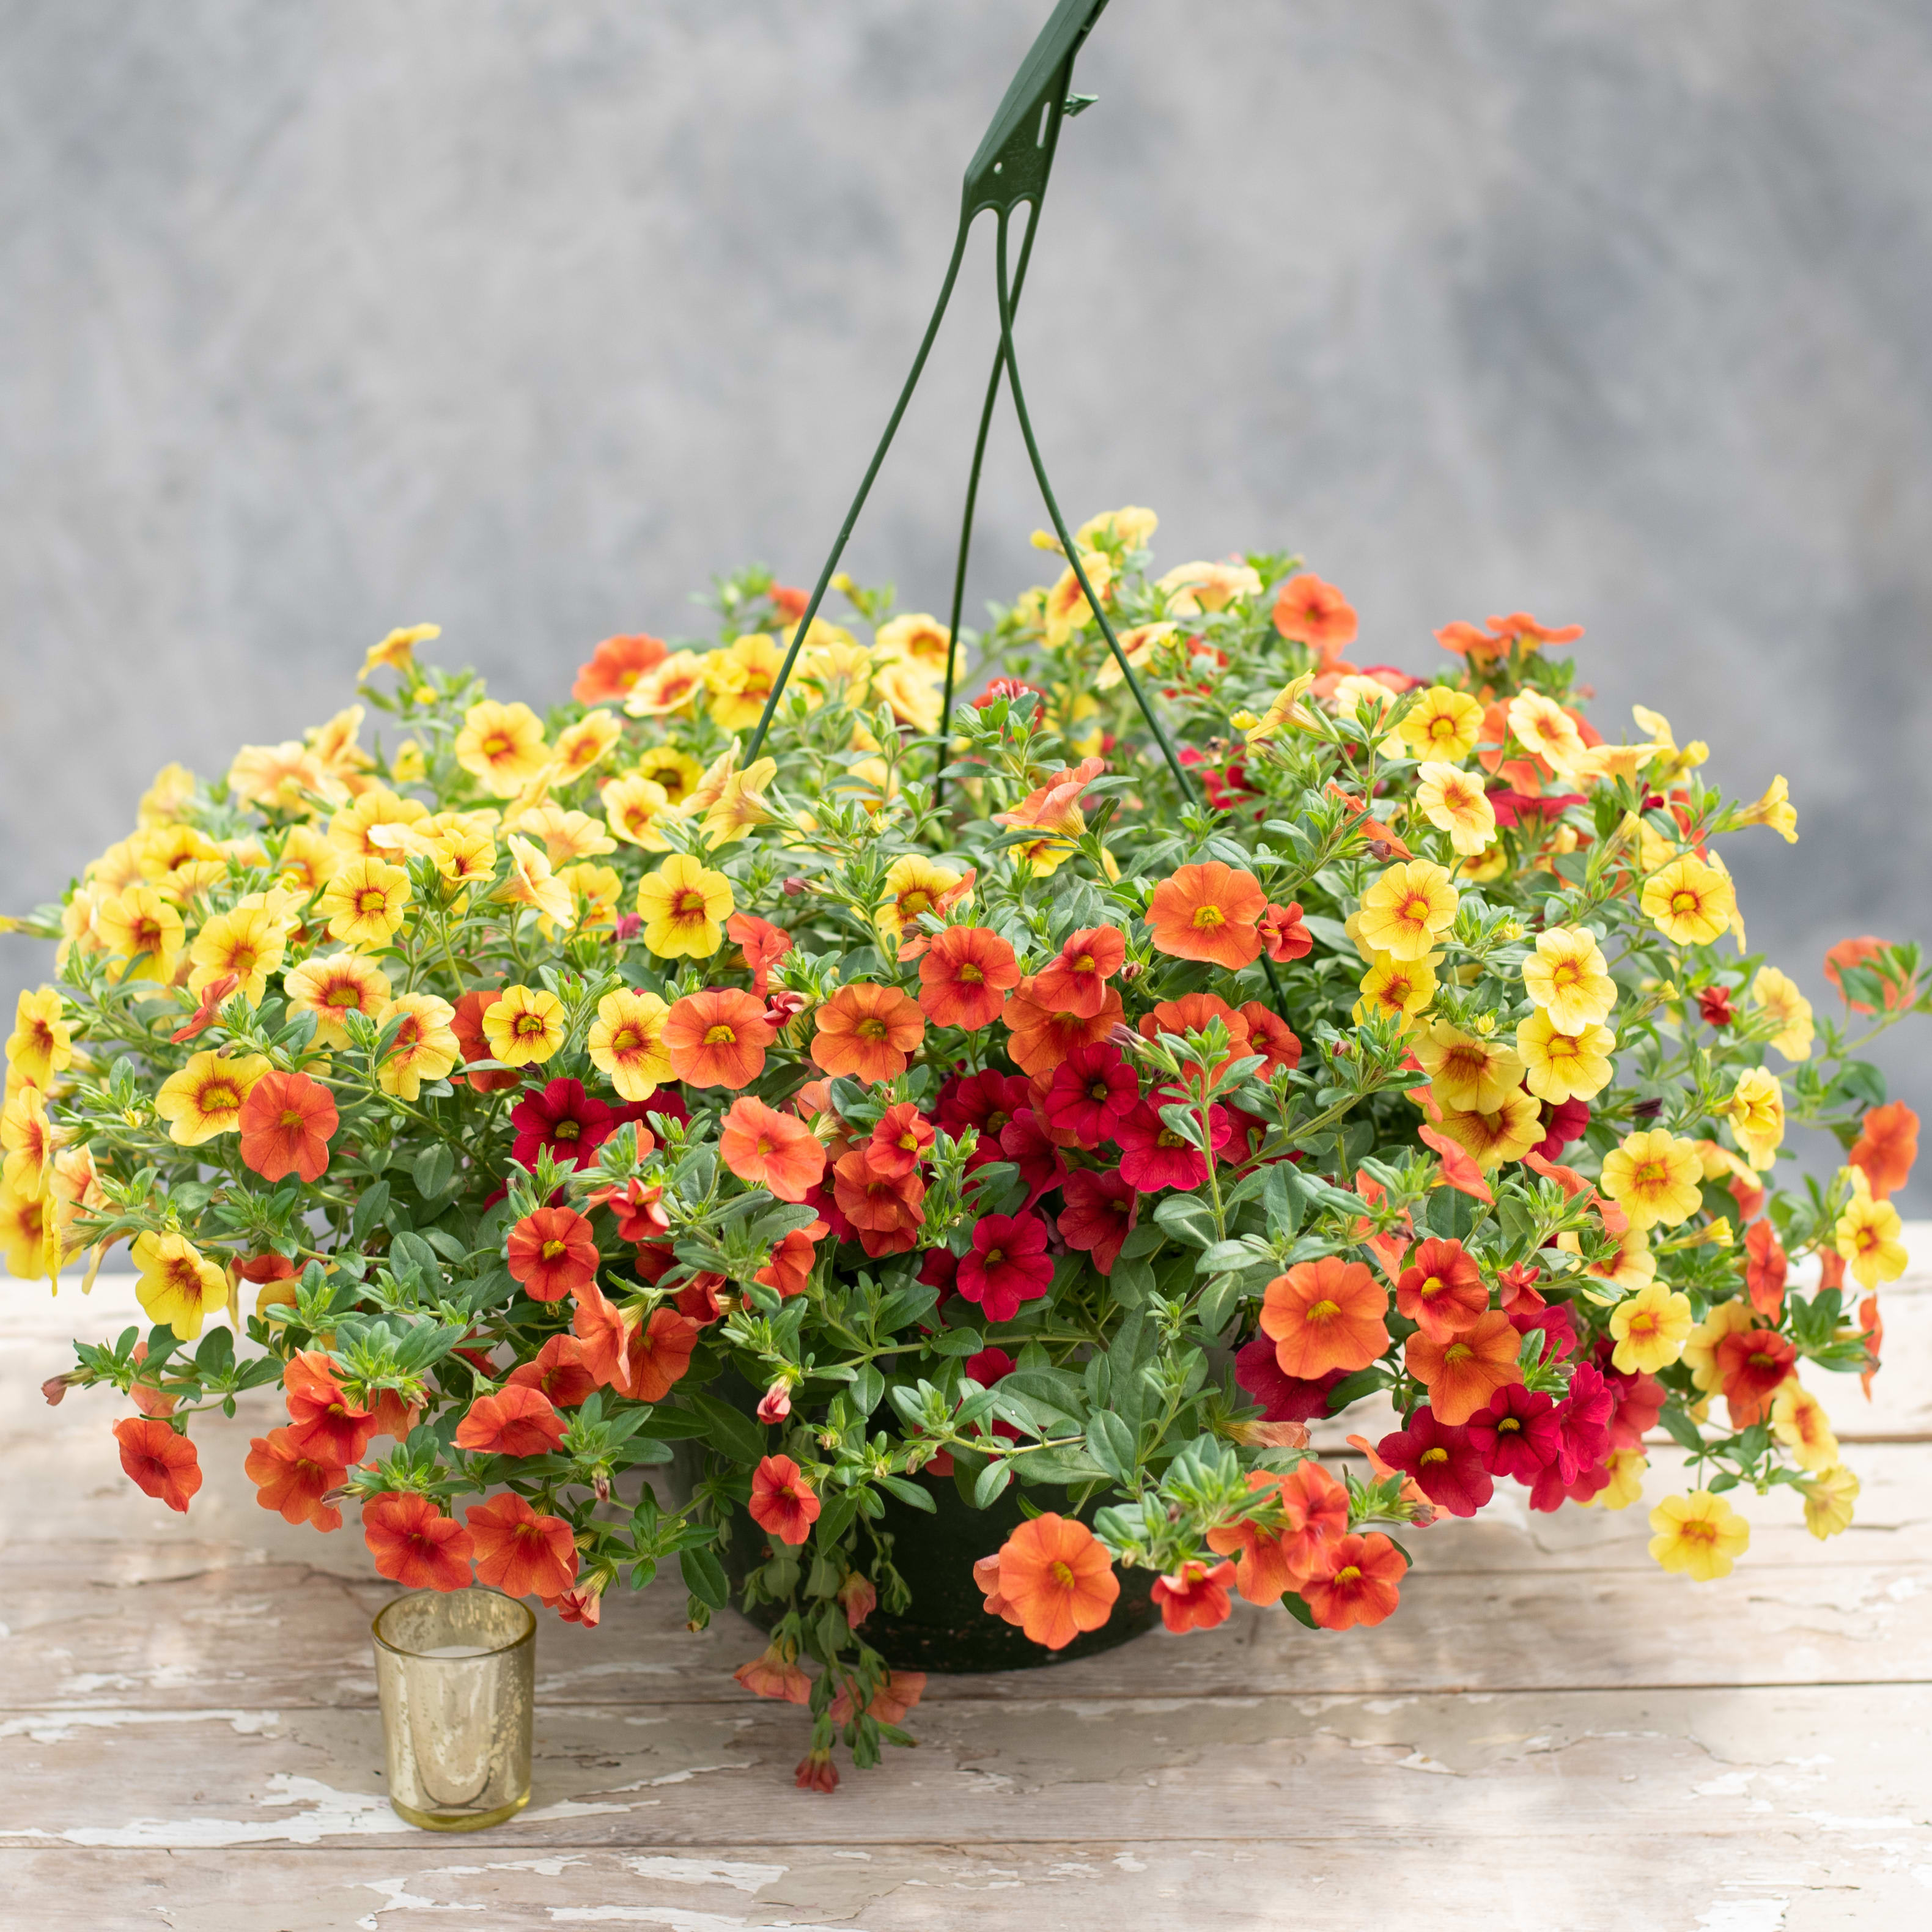 Hanging Calibrachoa Baskets -2 - Decorate the exterior of your home with 2 of these hanging blooming calibrachoa (million bells)baskets (colors may vary depending on availability)